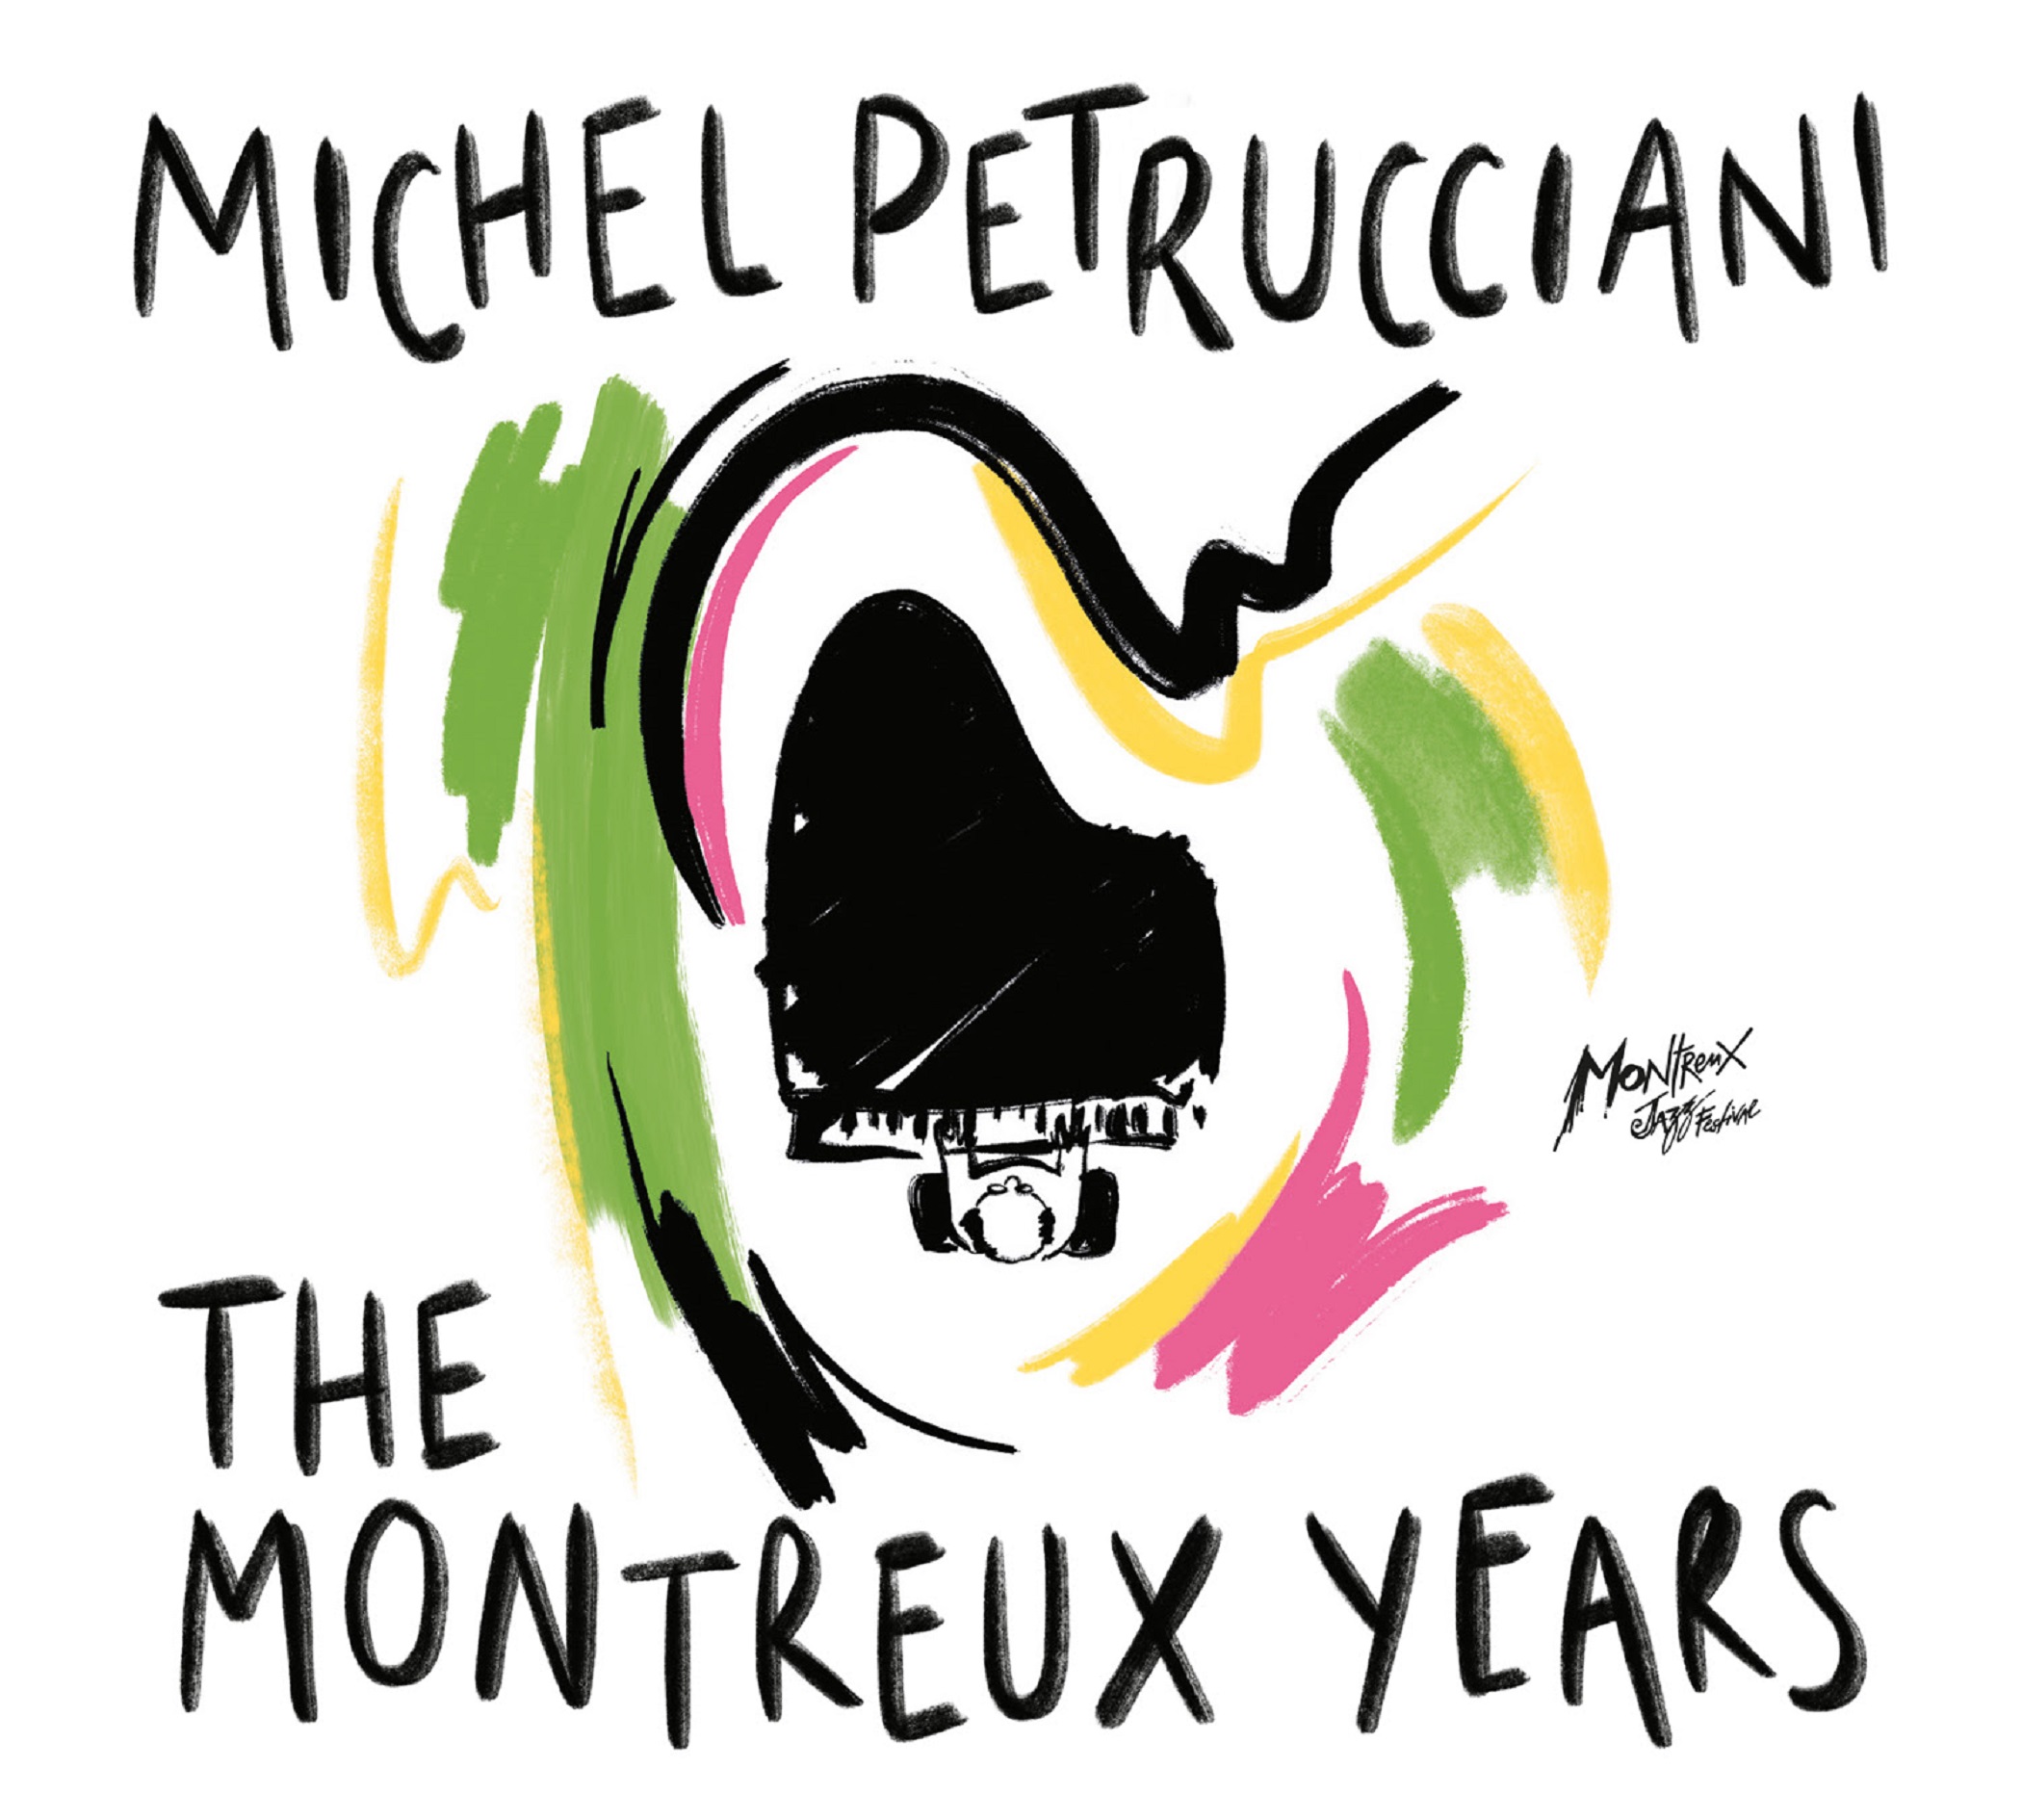 MICHEL PETRUCCIANI: THE MONTREUX YEARS - Coming Out April 7, 2023